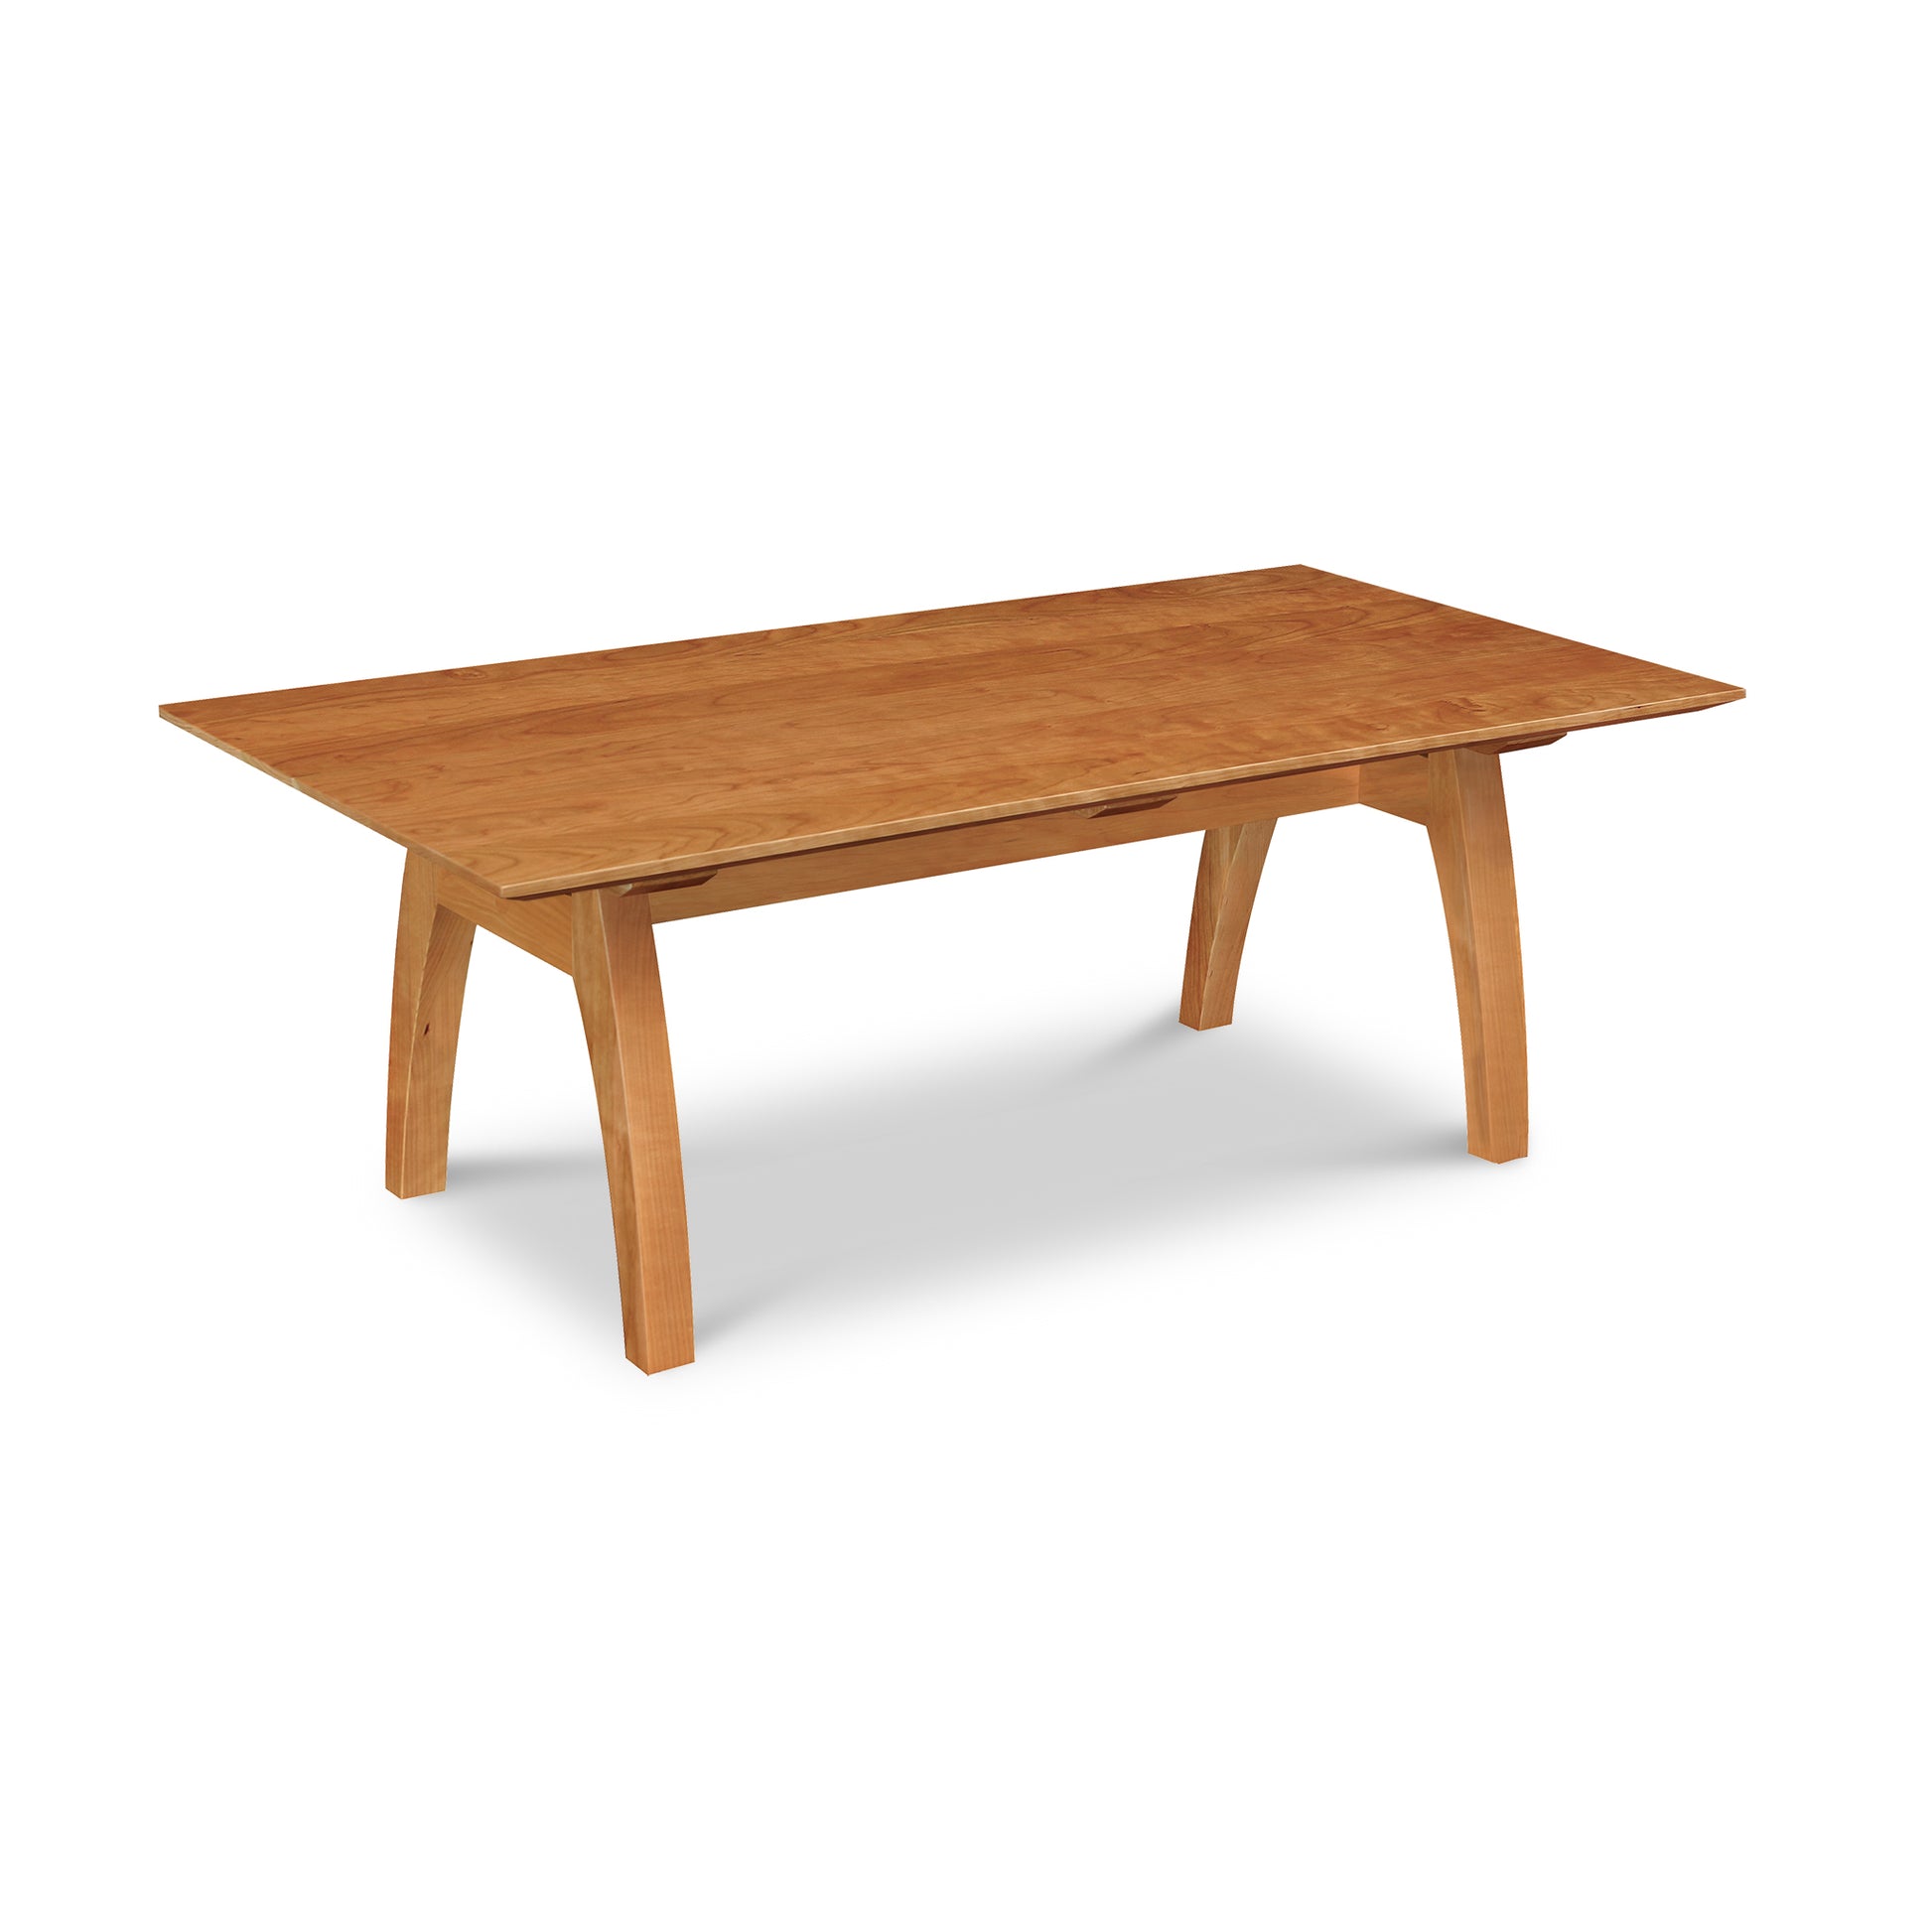 This handmade Lyndon Furniture Vermont Modern Trestle Coffee Table features a wooden top and legs, combining natural elegance with rustic charm.